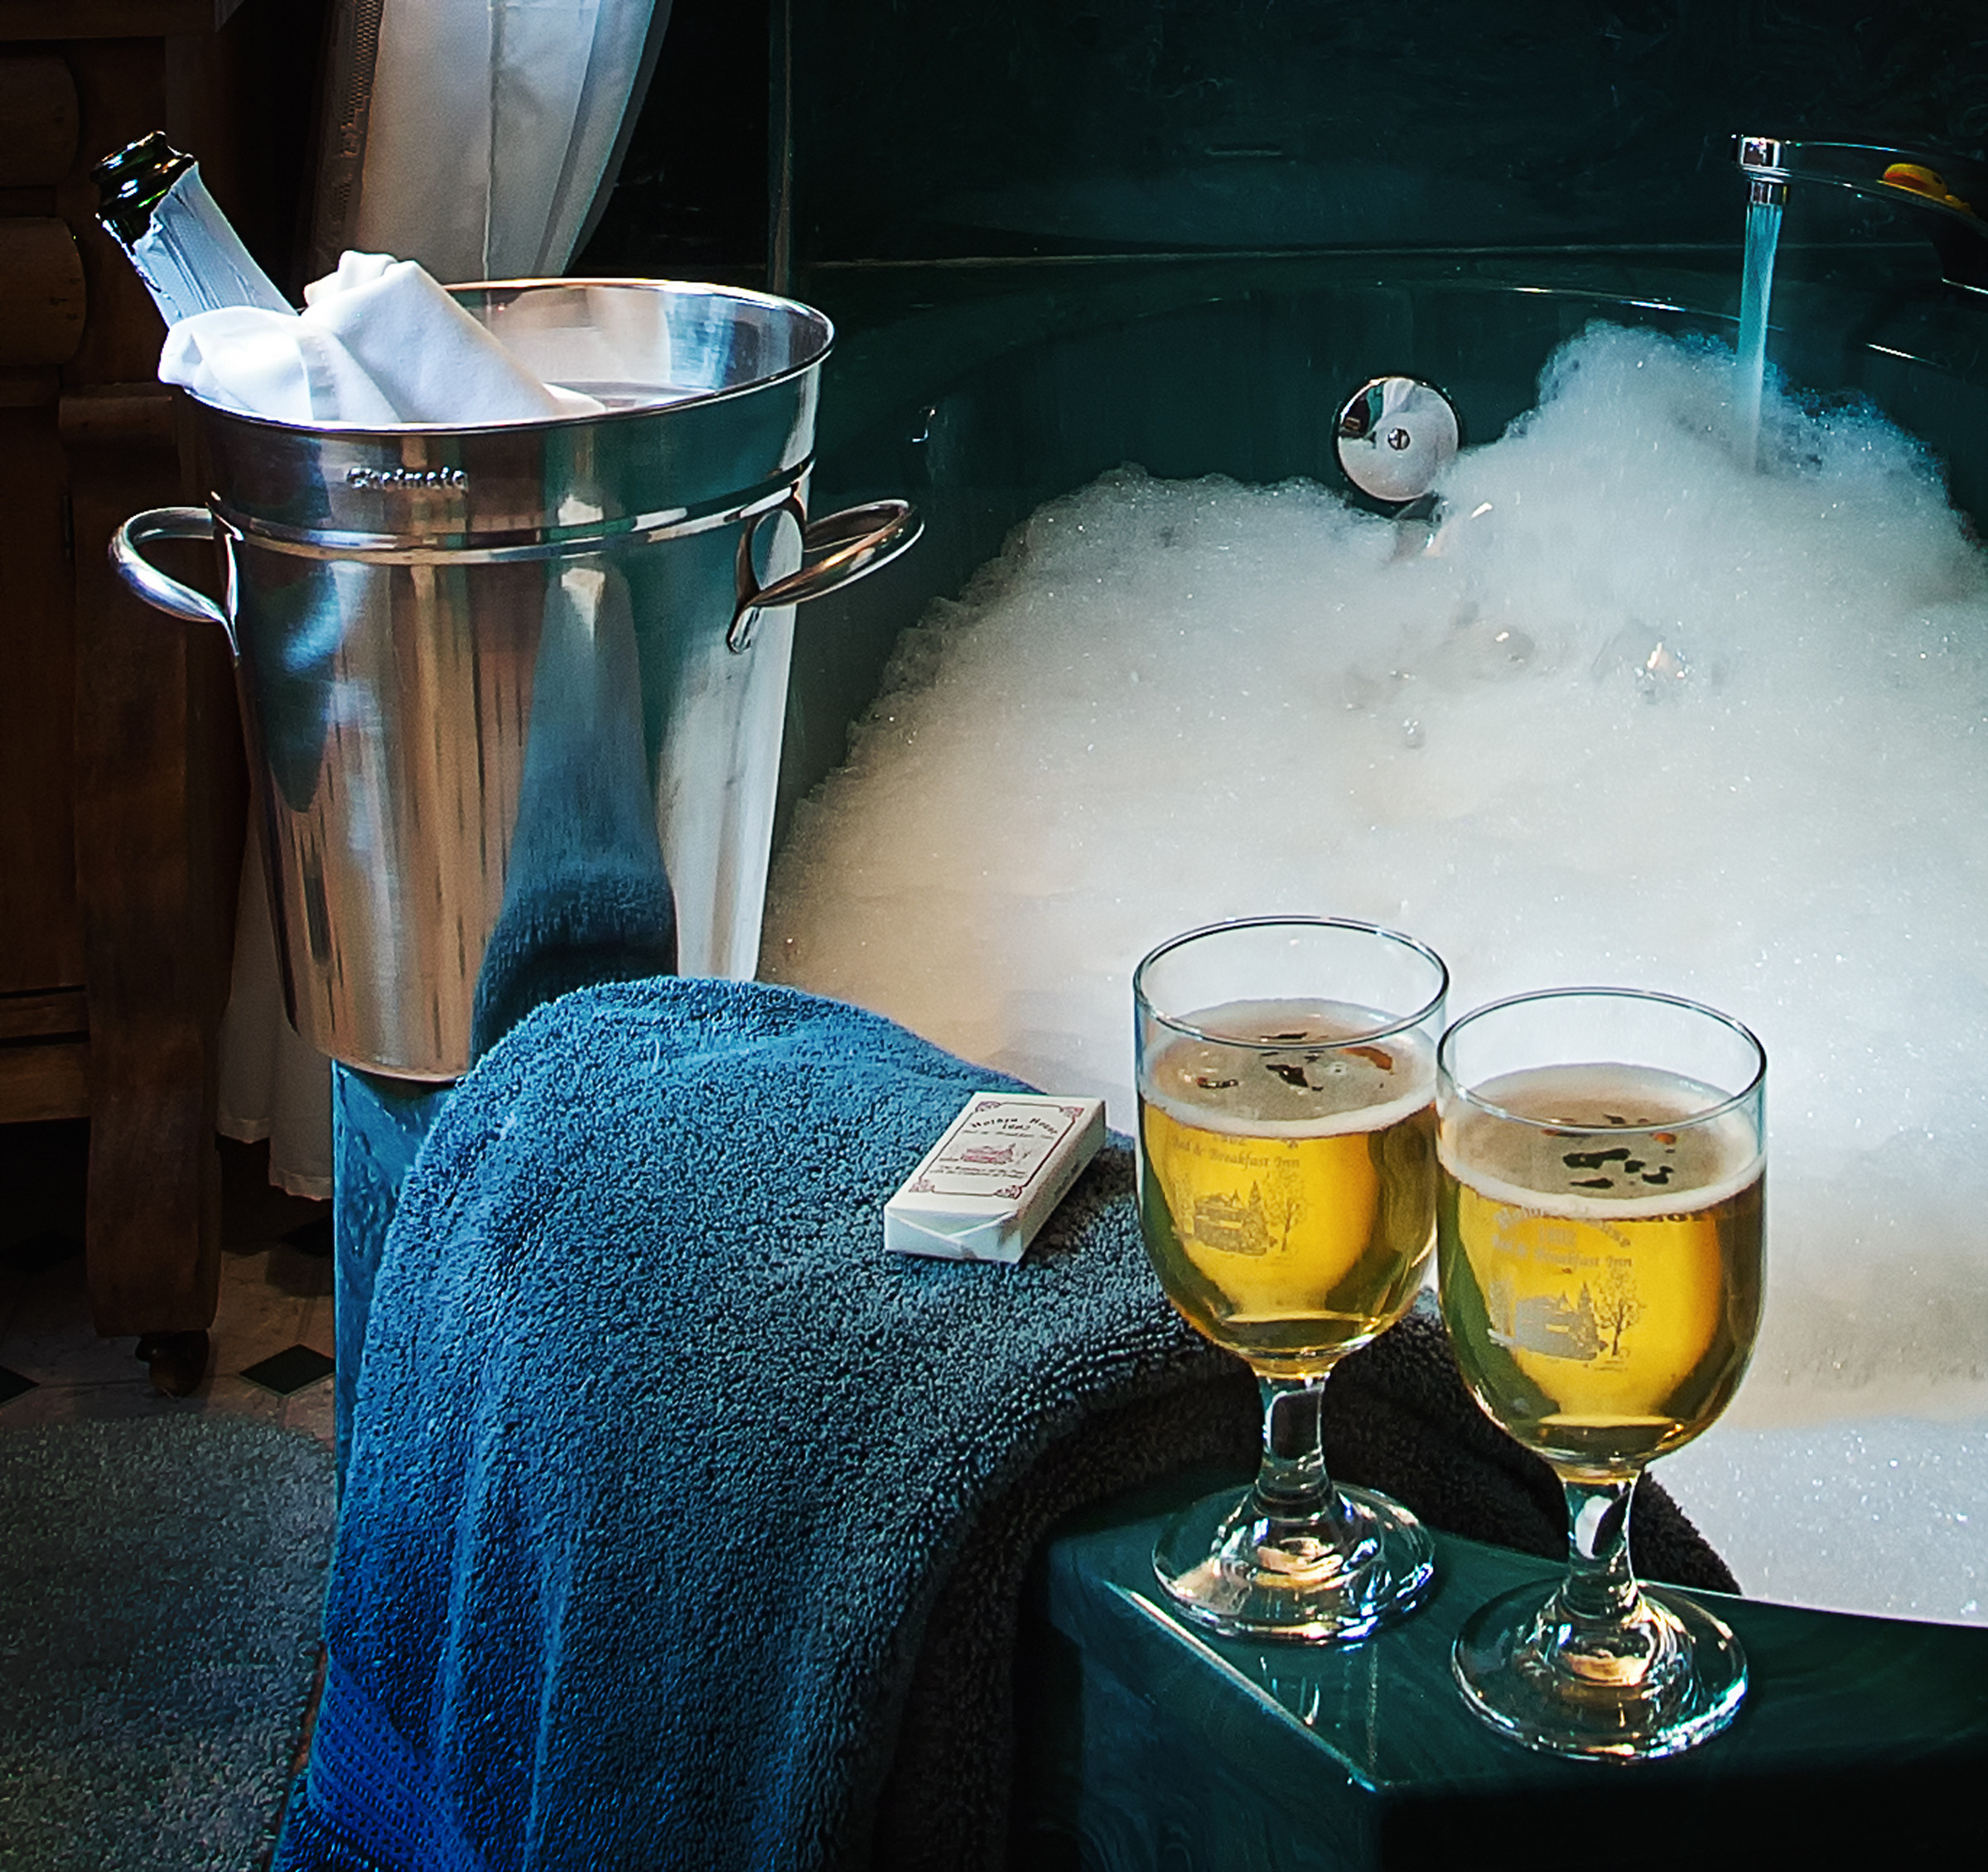 Romance packages are our speciality with all private baths